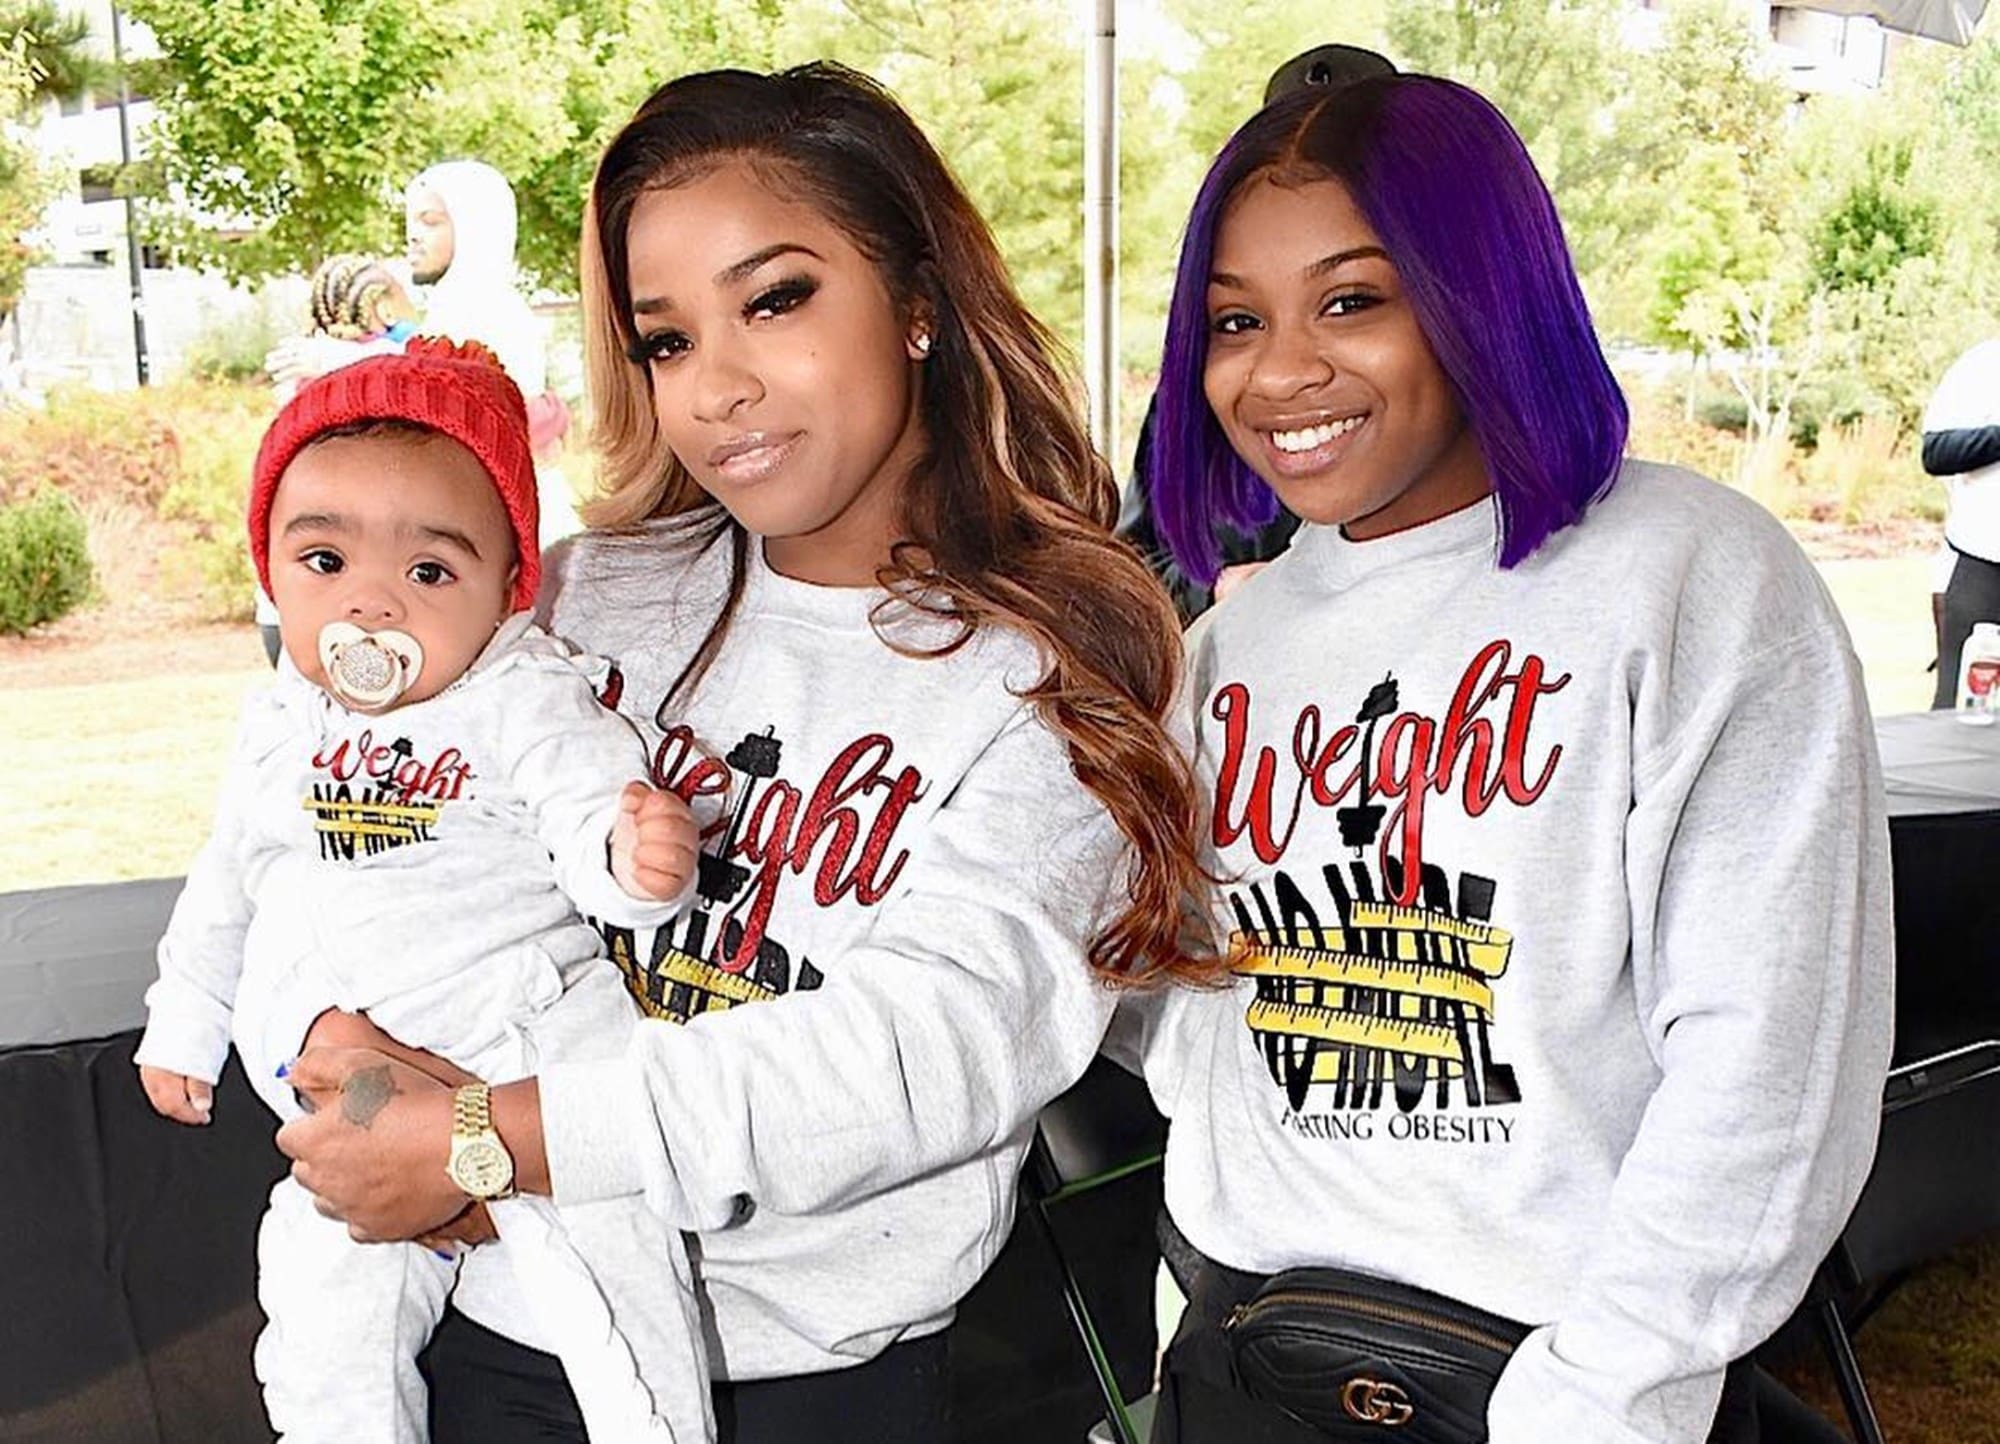 Toya Wright Takes Part In Another 'Weight No More' 5K Walk/Run Event For Fighting Against Obesity Together With Reginae Carter And Robert Rushing - Check Out The Photo